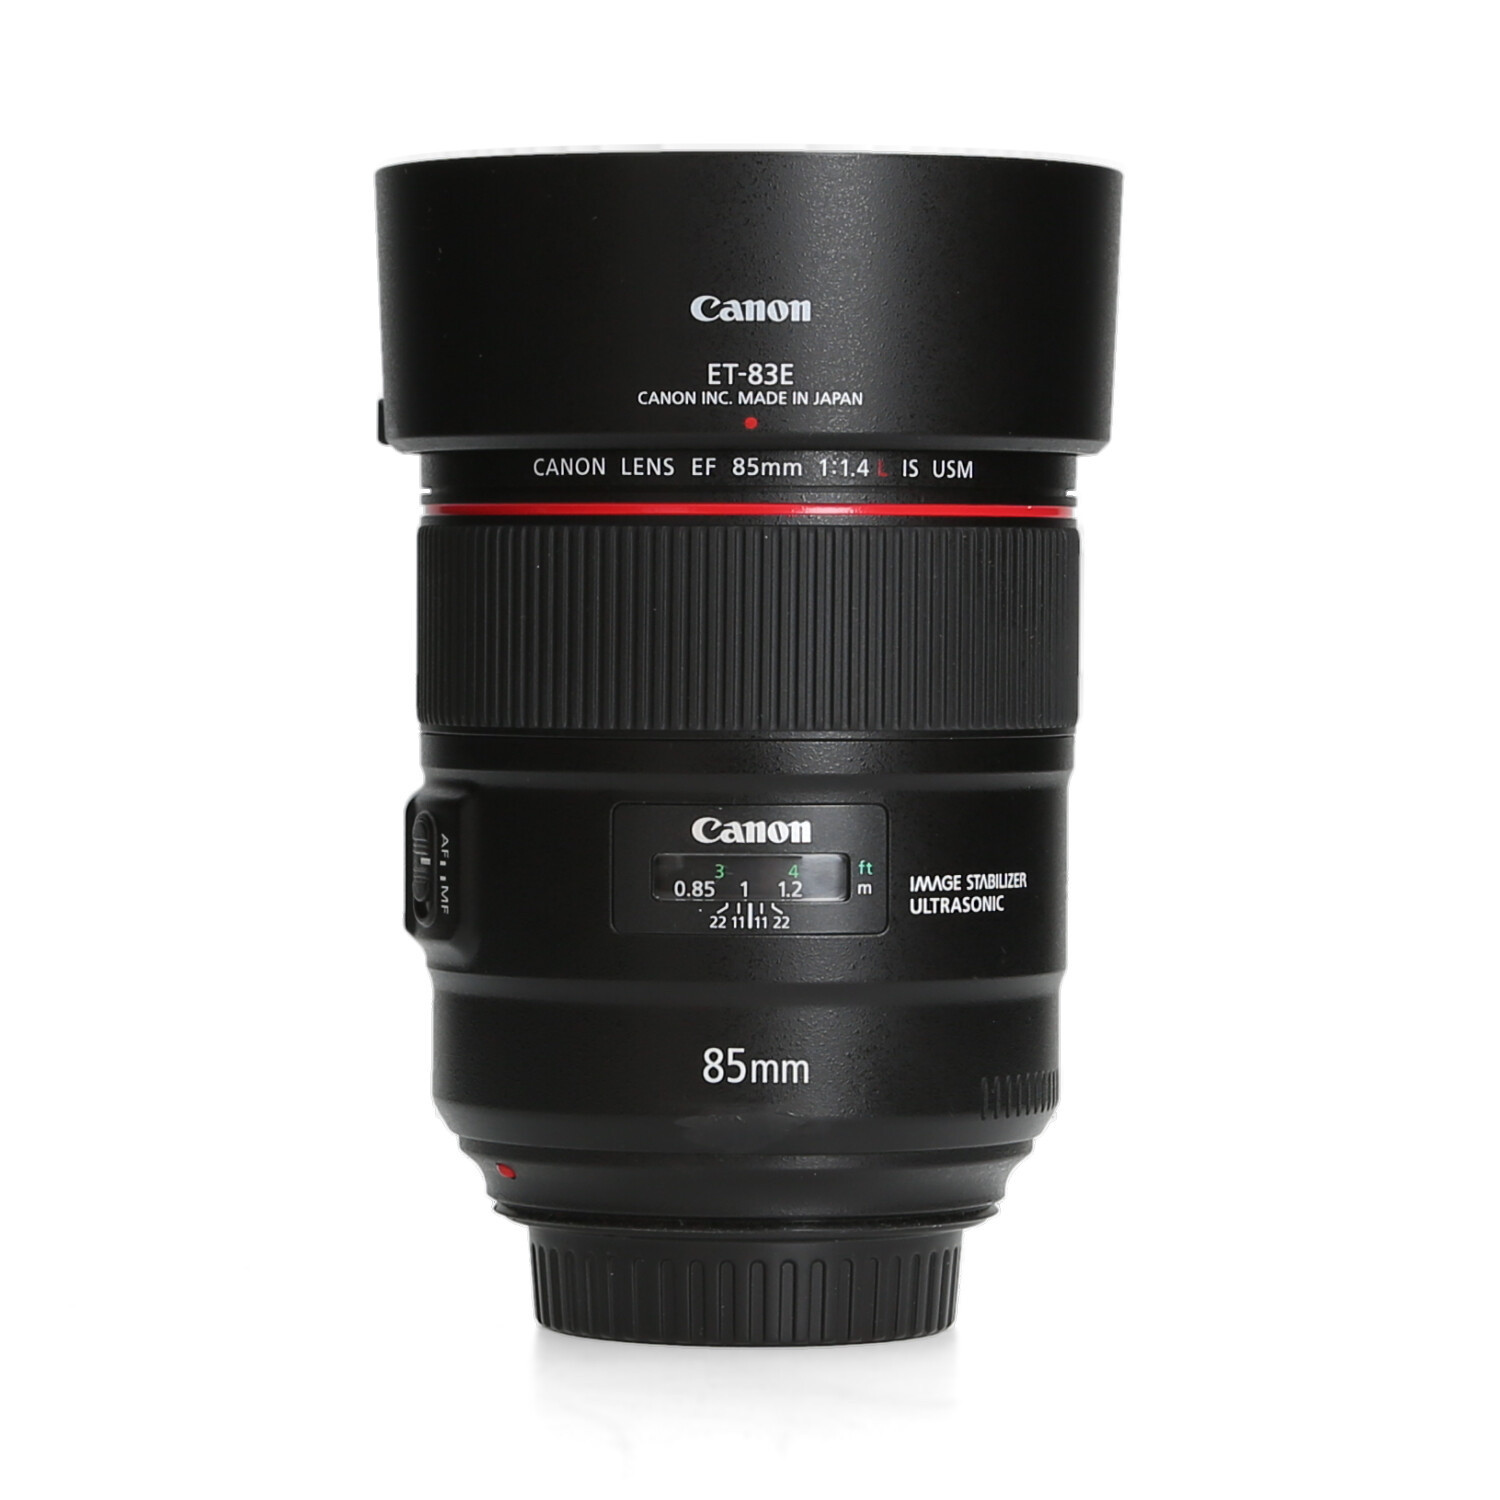 Canon Canon 85mm 1.4 L EF IS USM